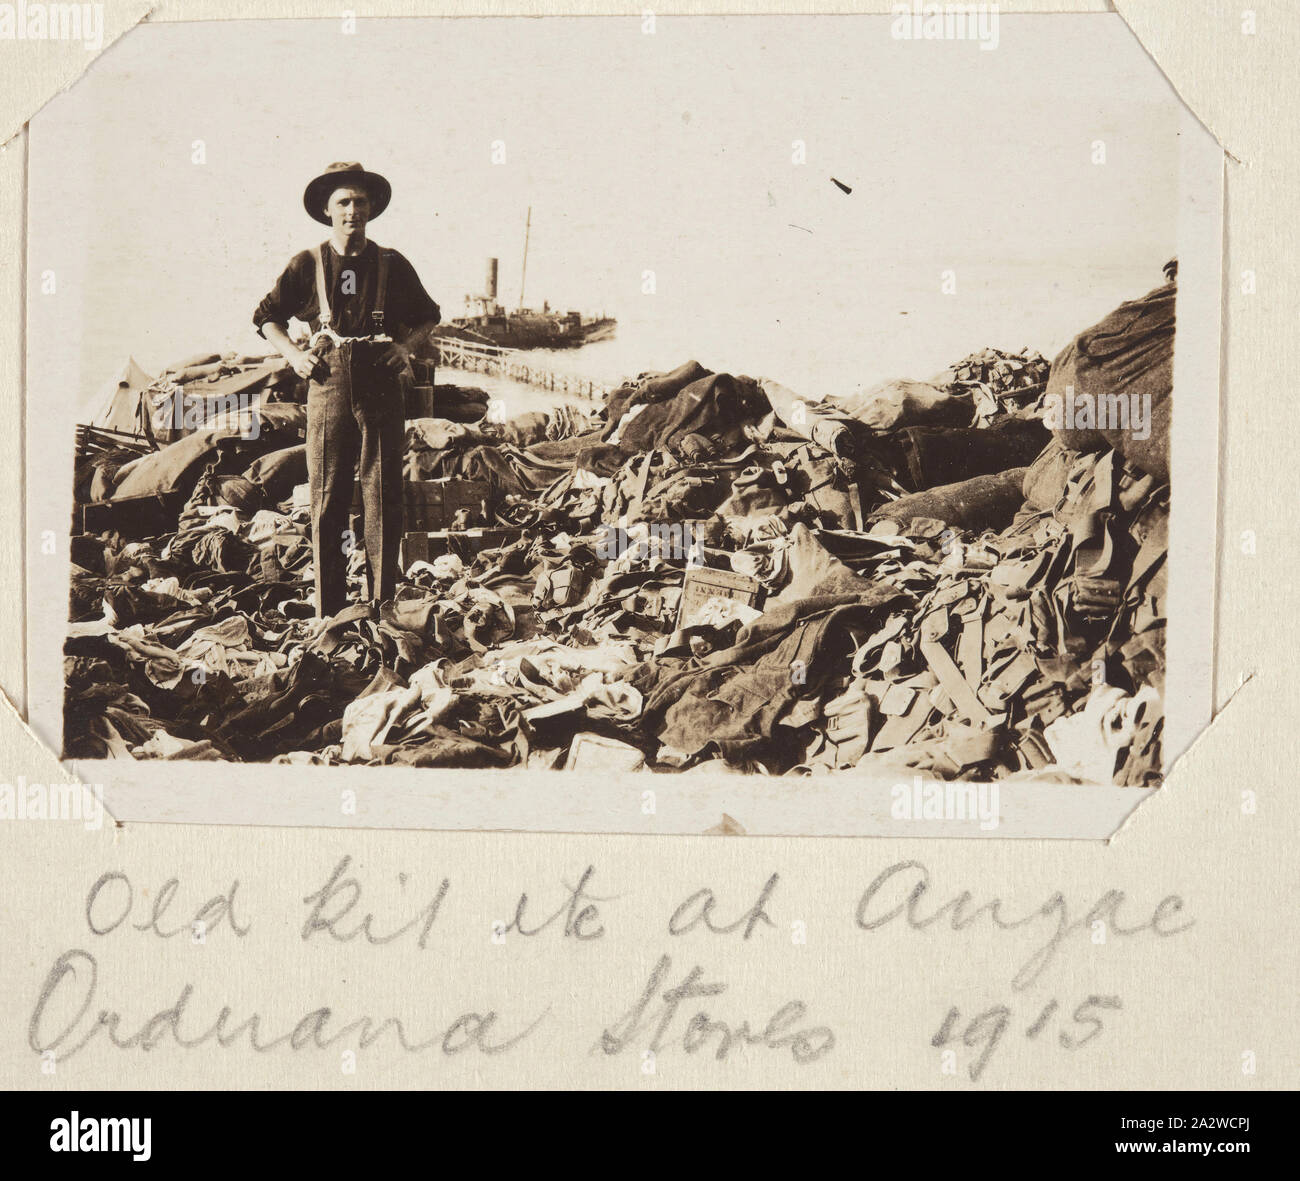 Photograph - 'Old Kit' at 'Anzac Ordnance Stores', Gallipoli, Private John Lord, World War I, 1915, Black and white photographic print depicting 'old kit' at an ordnance store in Gallipoli. This possibly is a reference to the belongings of those killed during the Gallipoli campaign. Attached to a small notebook used as a photograph album, containing 55 black and white photographs of ANZAC soldiers in Egypt, Mudros and Gallipoli during World War I Stock Photo